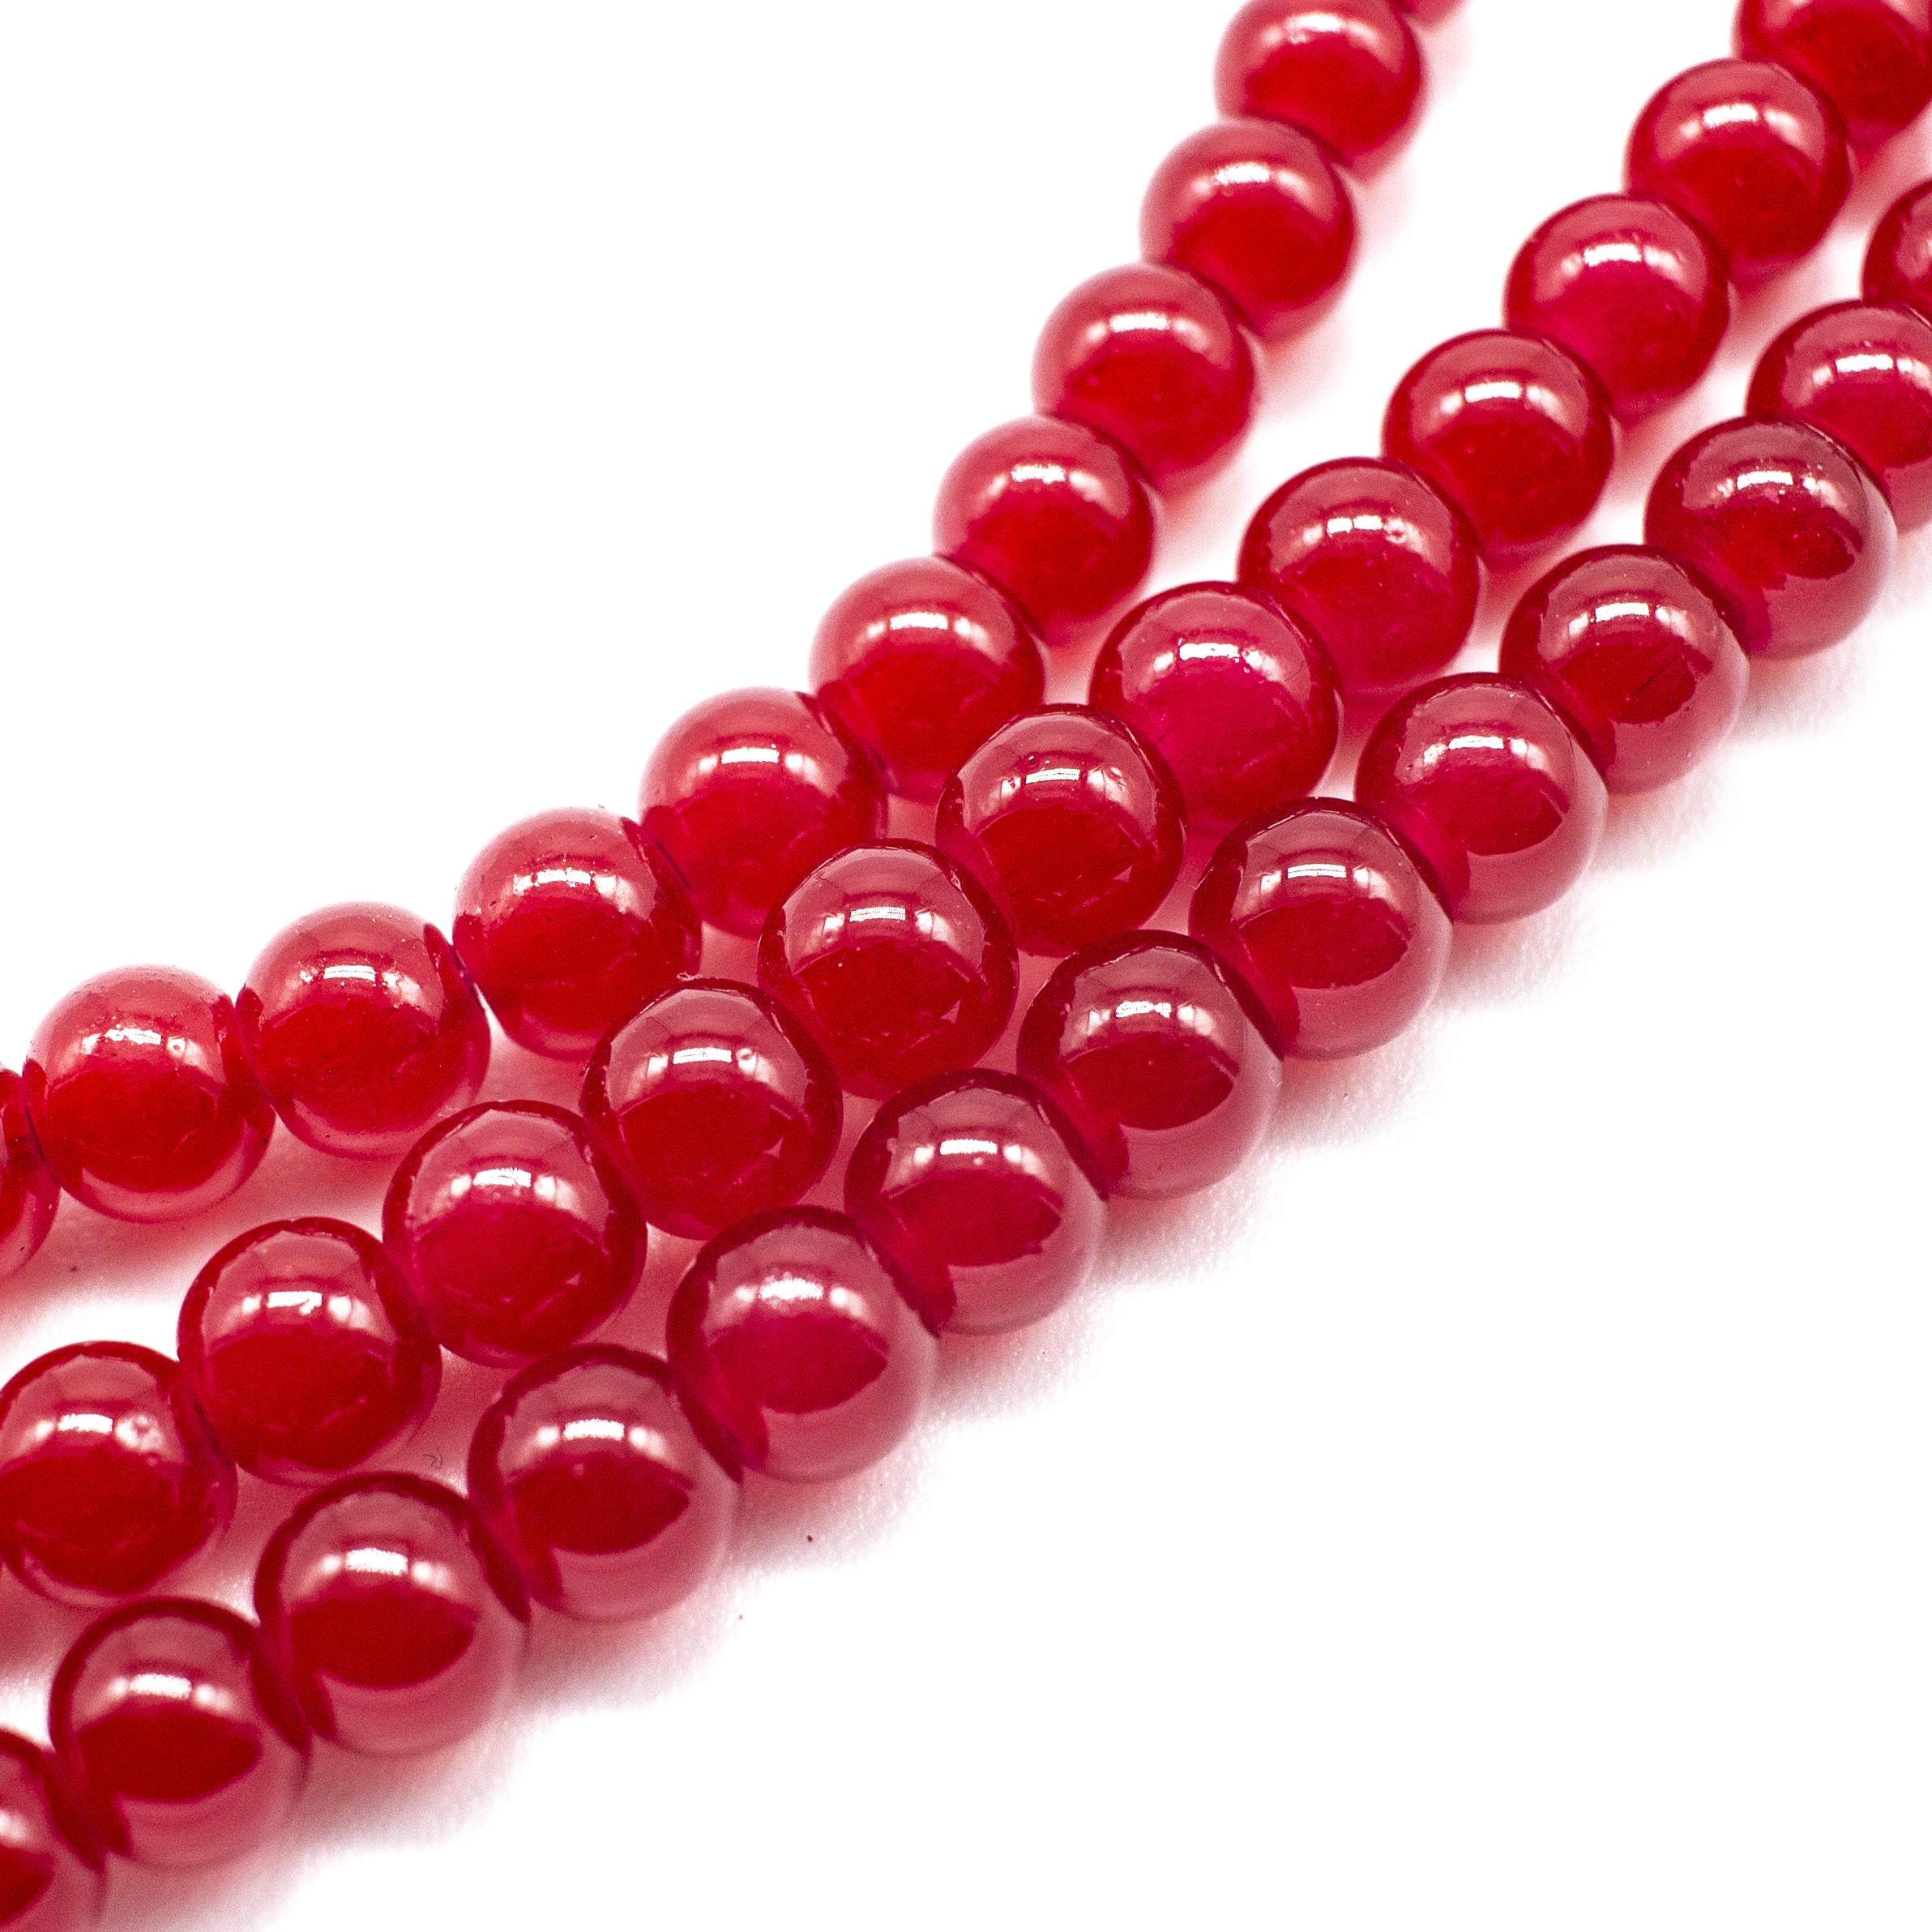 Milky Glass Beads 6mm - Deep Red